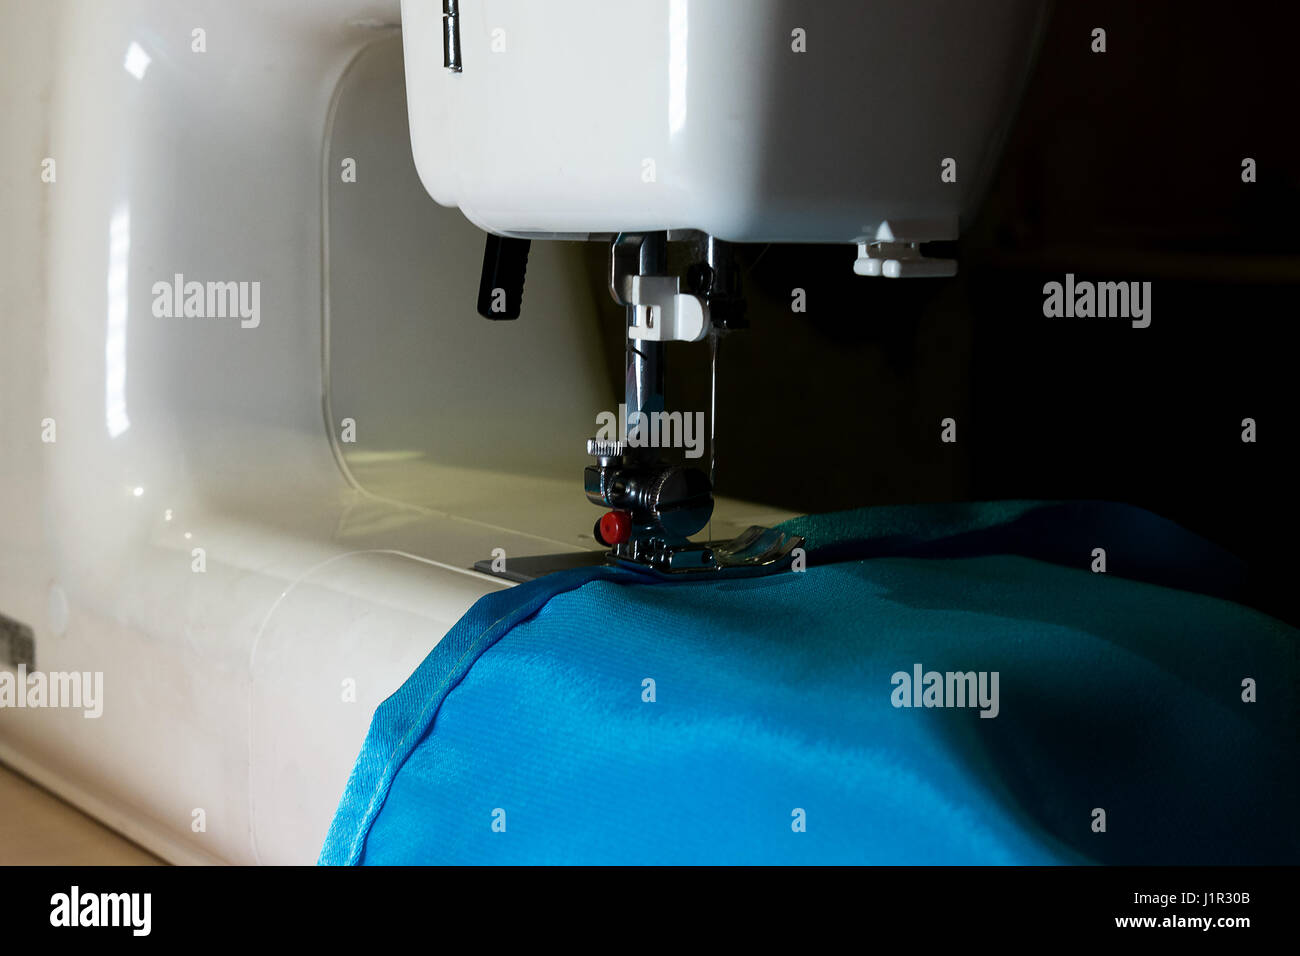 white sewing machine to sew a fabric Stock Photo